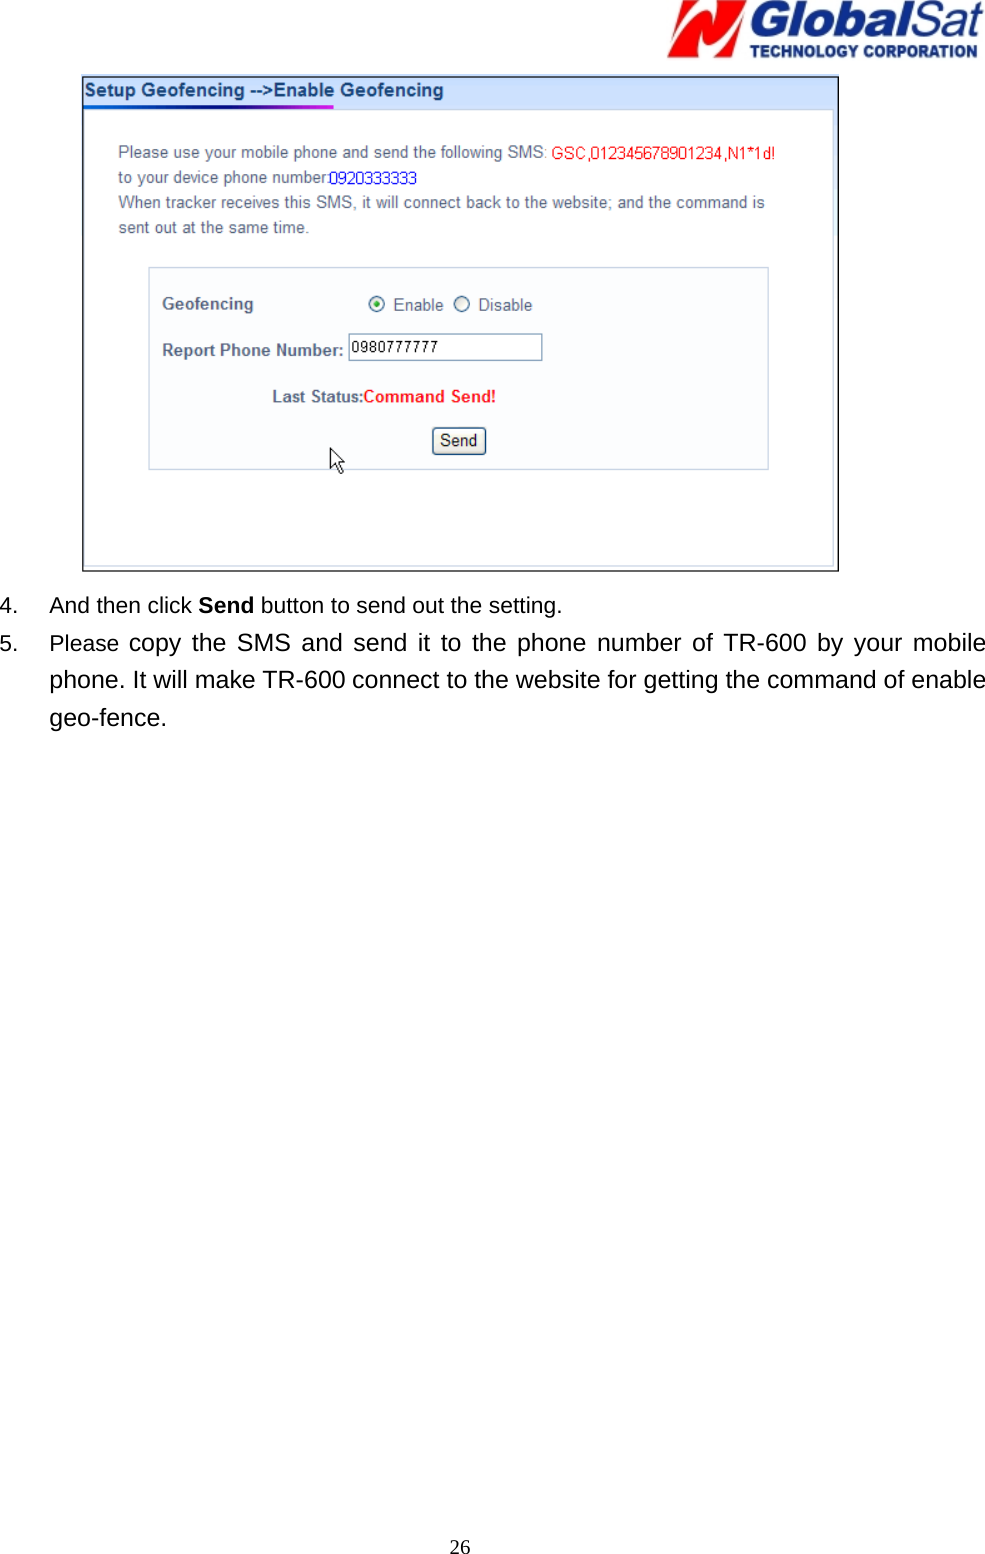   26 4.  And then click Send button to send out the setting. 5. Please copy the SMS and send it to the phone number of TR-600 by your mobile phone. It will make TR-600 connect to the website for getting the command of enable geo-fence.  